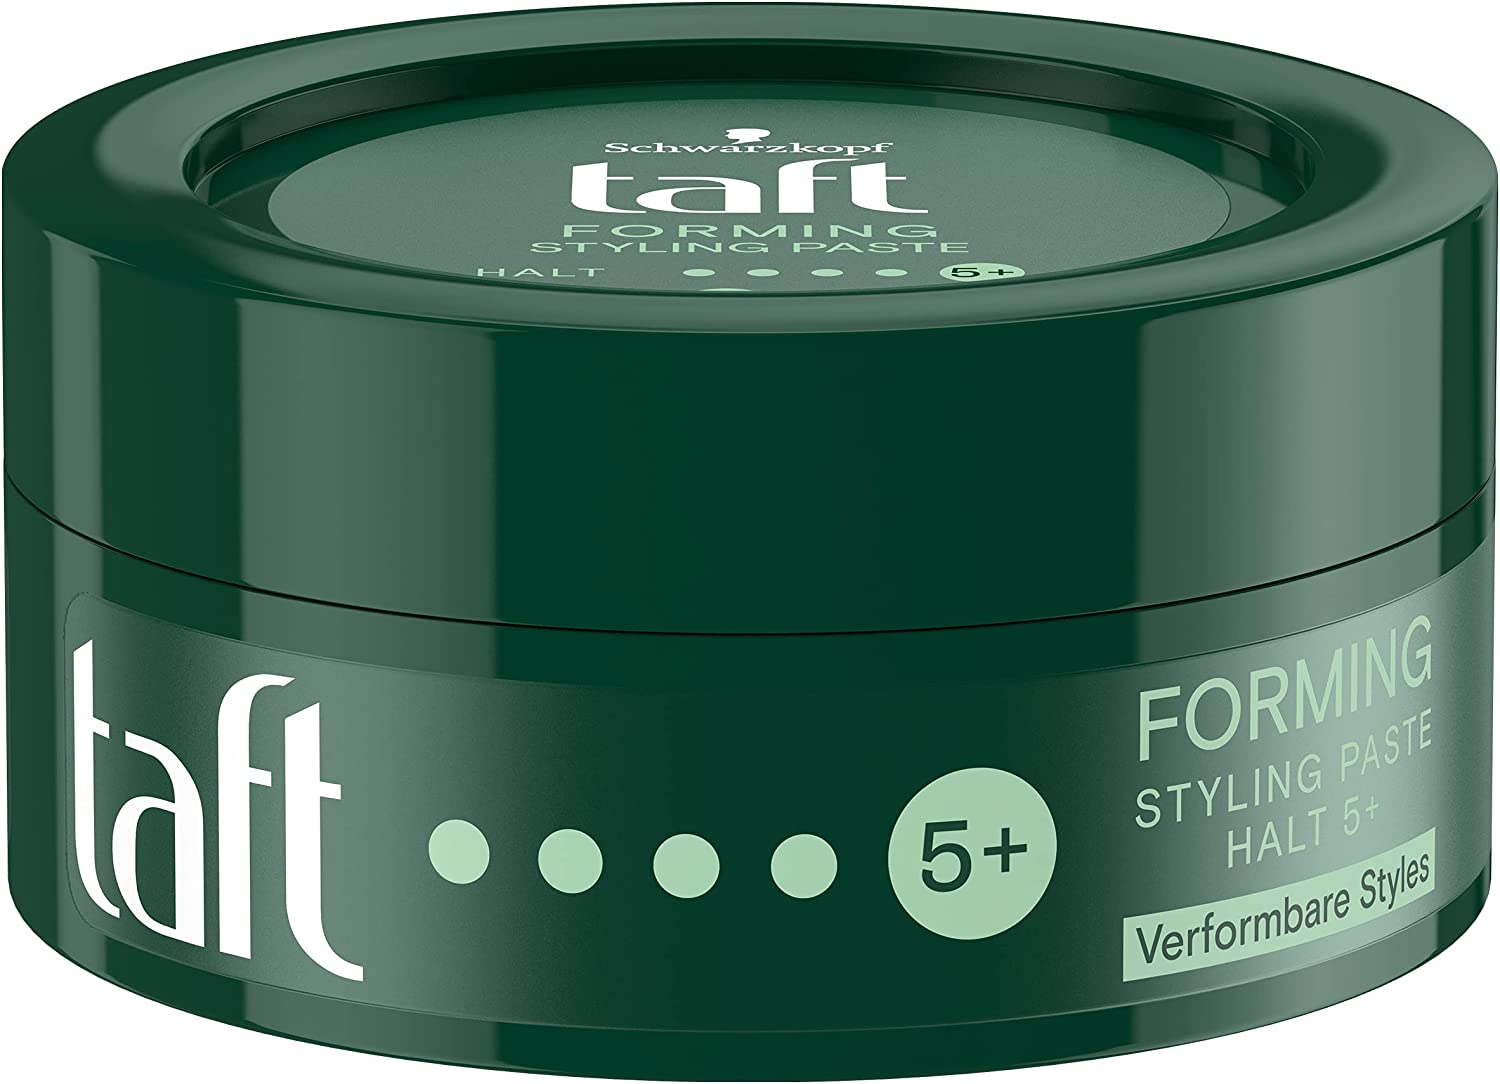 Taft Forming styling paste with holding grade 5+ (75 ml), hair paste for textured styles in Undone look, controls hair styling for up to 24 hours